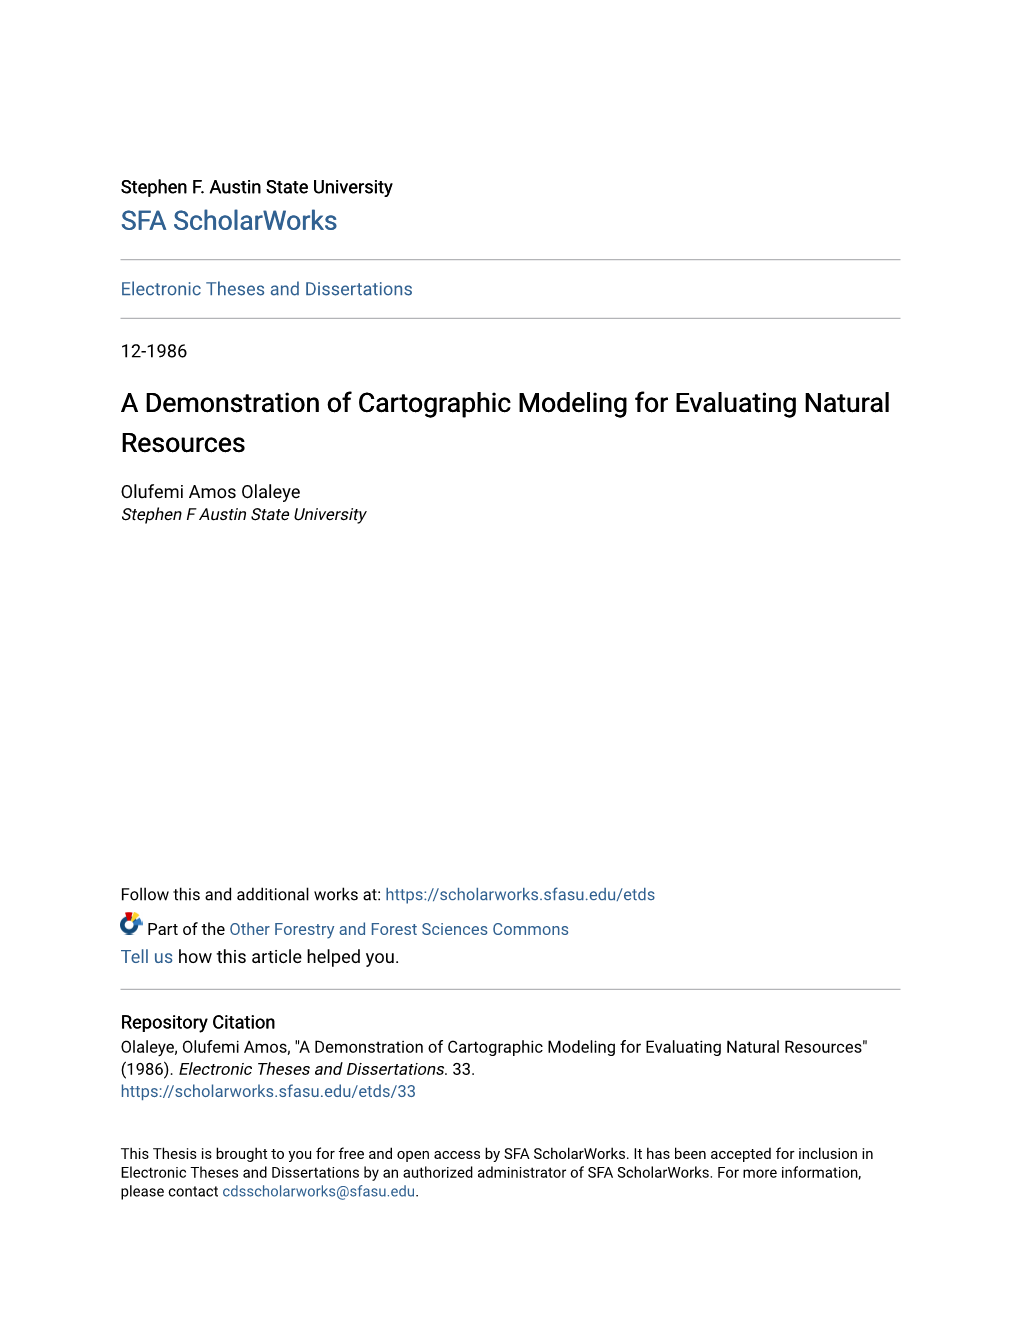 A Demonstration of Cartographic Modeling for Evaluating Natural Resources